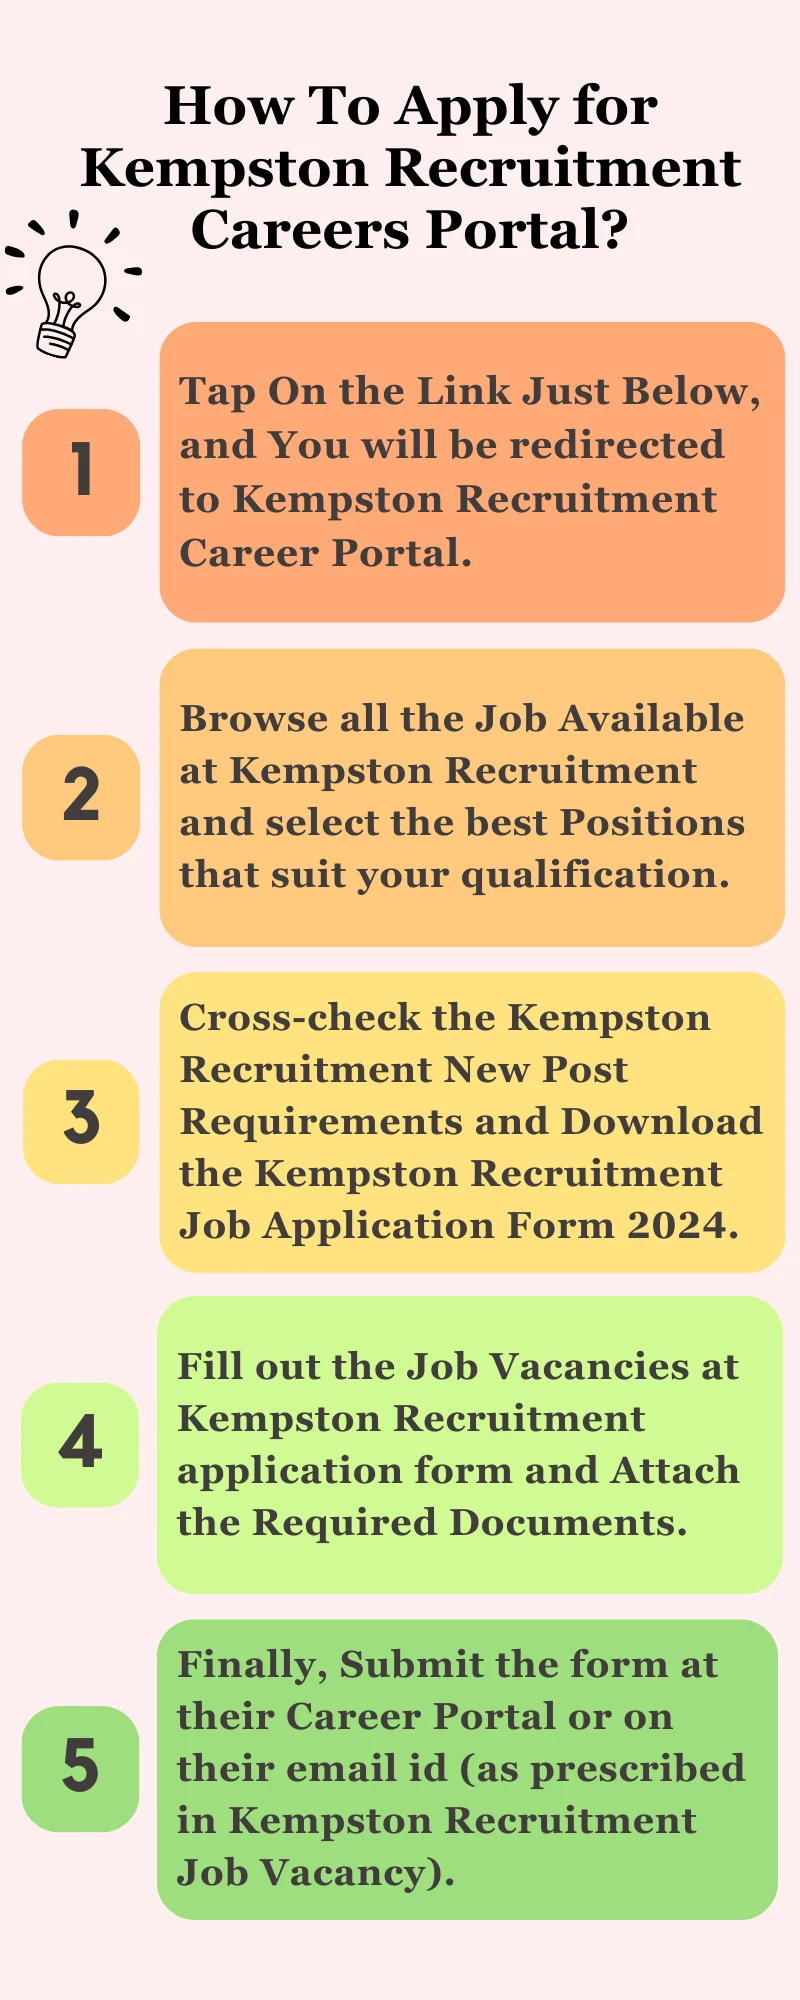 How To Apply for Kempston Recruitment Careers Portal?